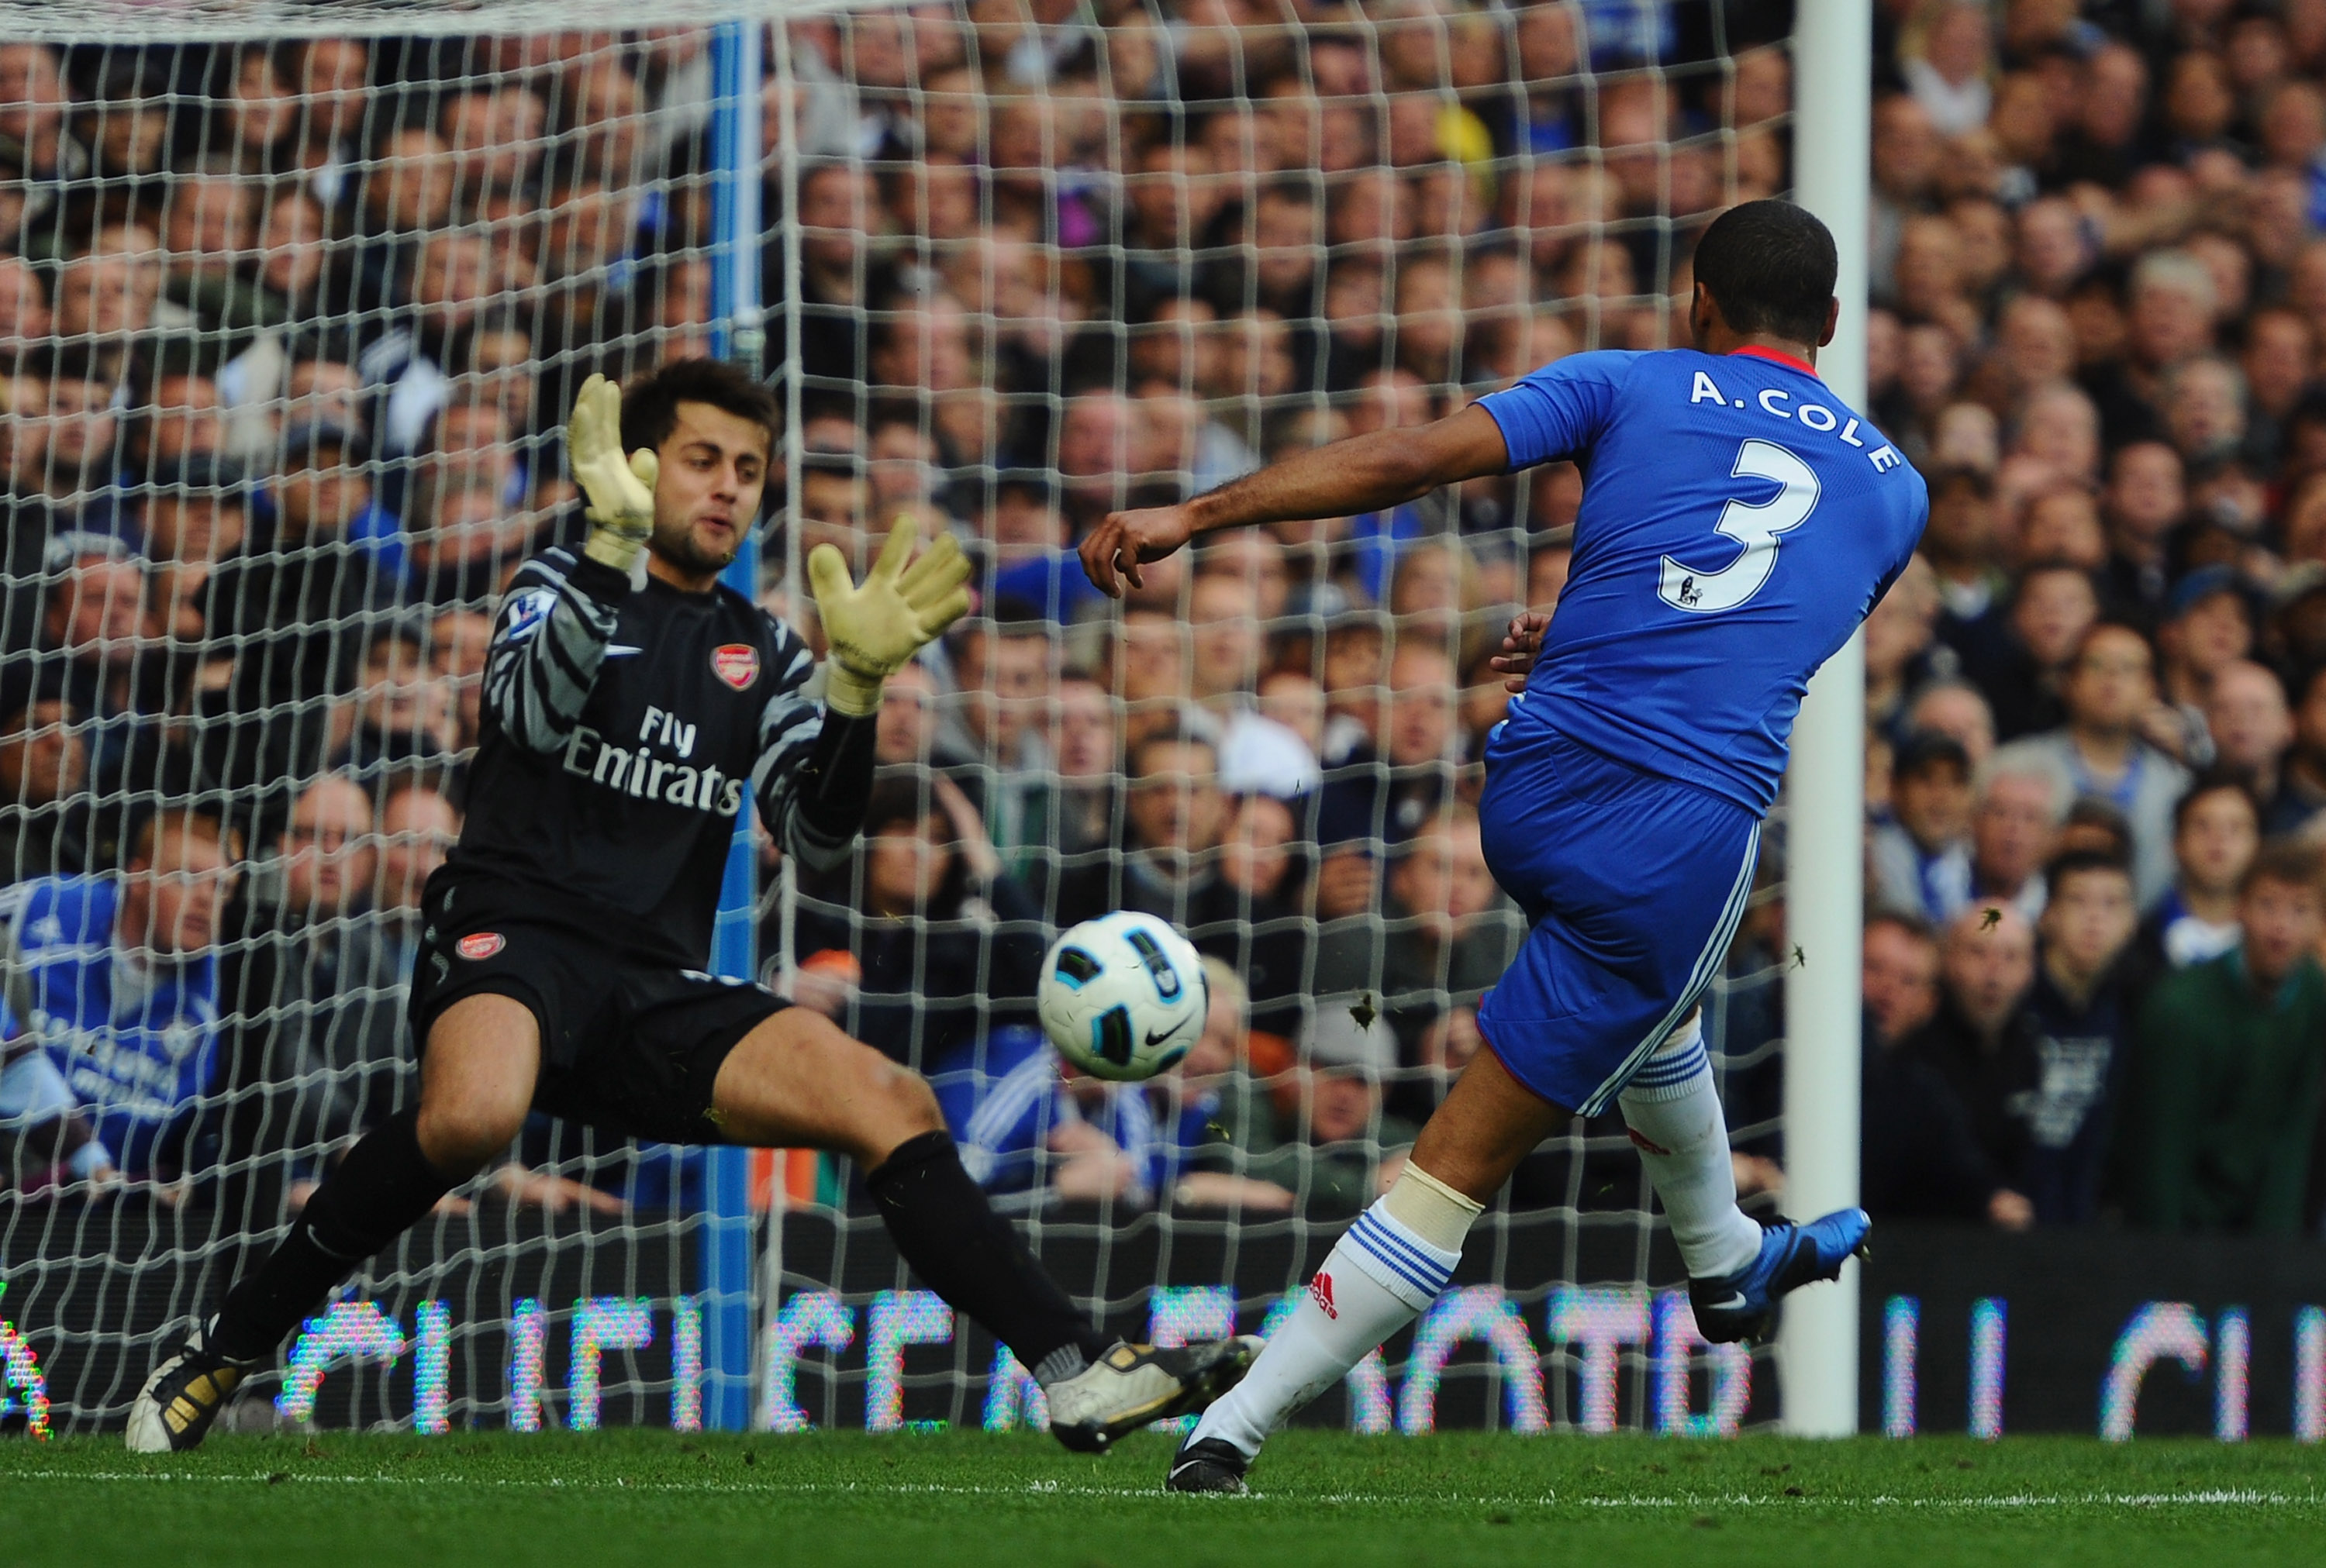 LONDON, ENGLAND - OCTOBER 03:  Ashley Cole of Chelsea shoots past Lukasz Fabianski of Arsenal but sees his 'goal' disallowed for offside during the Barclays Premier League match between Chelsea and Arsenal at Stamford Bridge on October 3, 2010 in London,